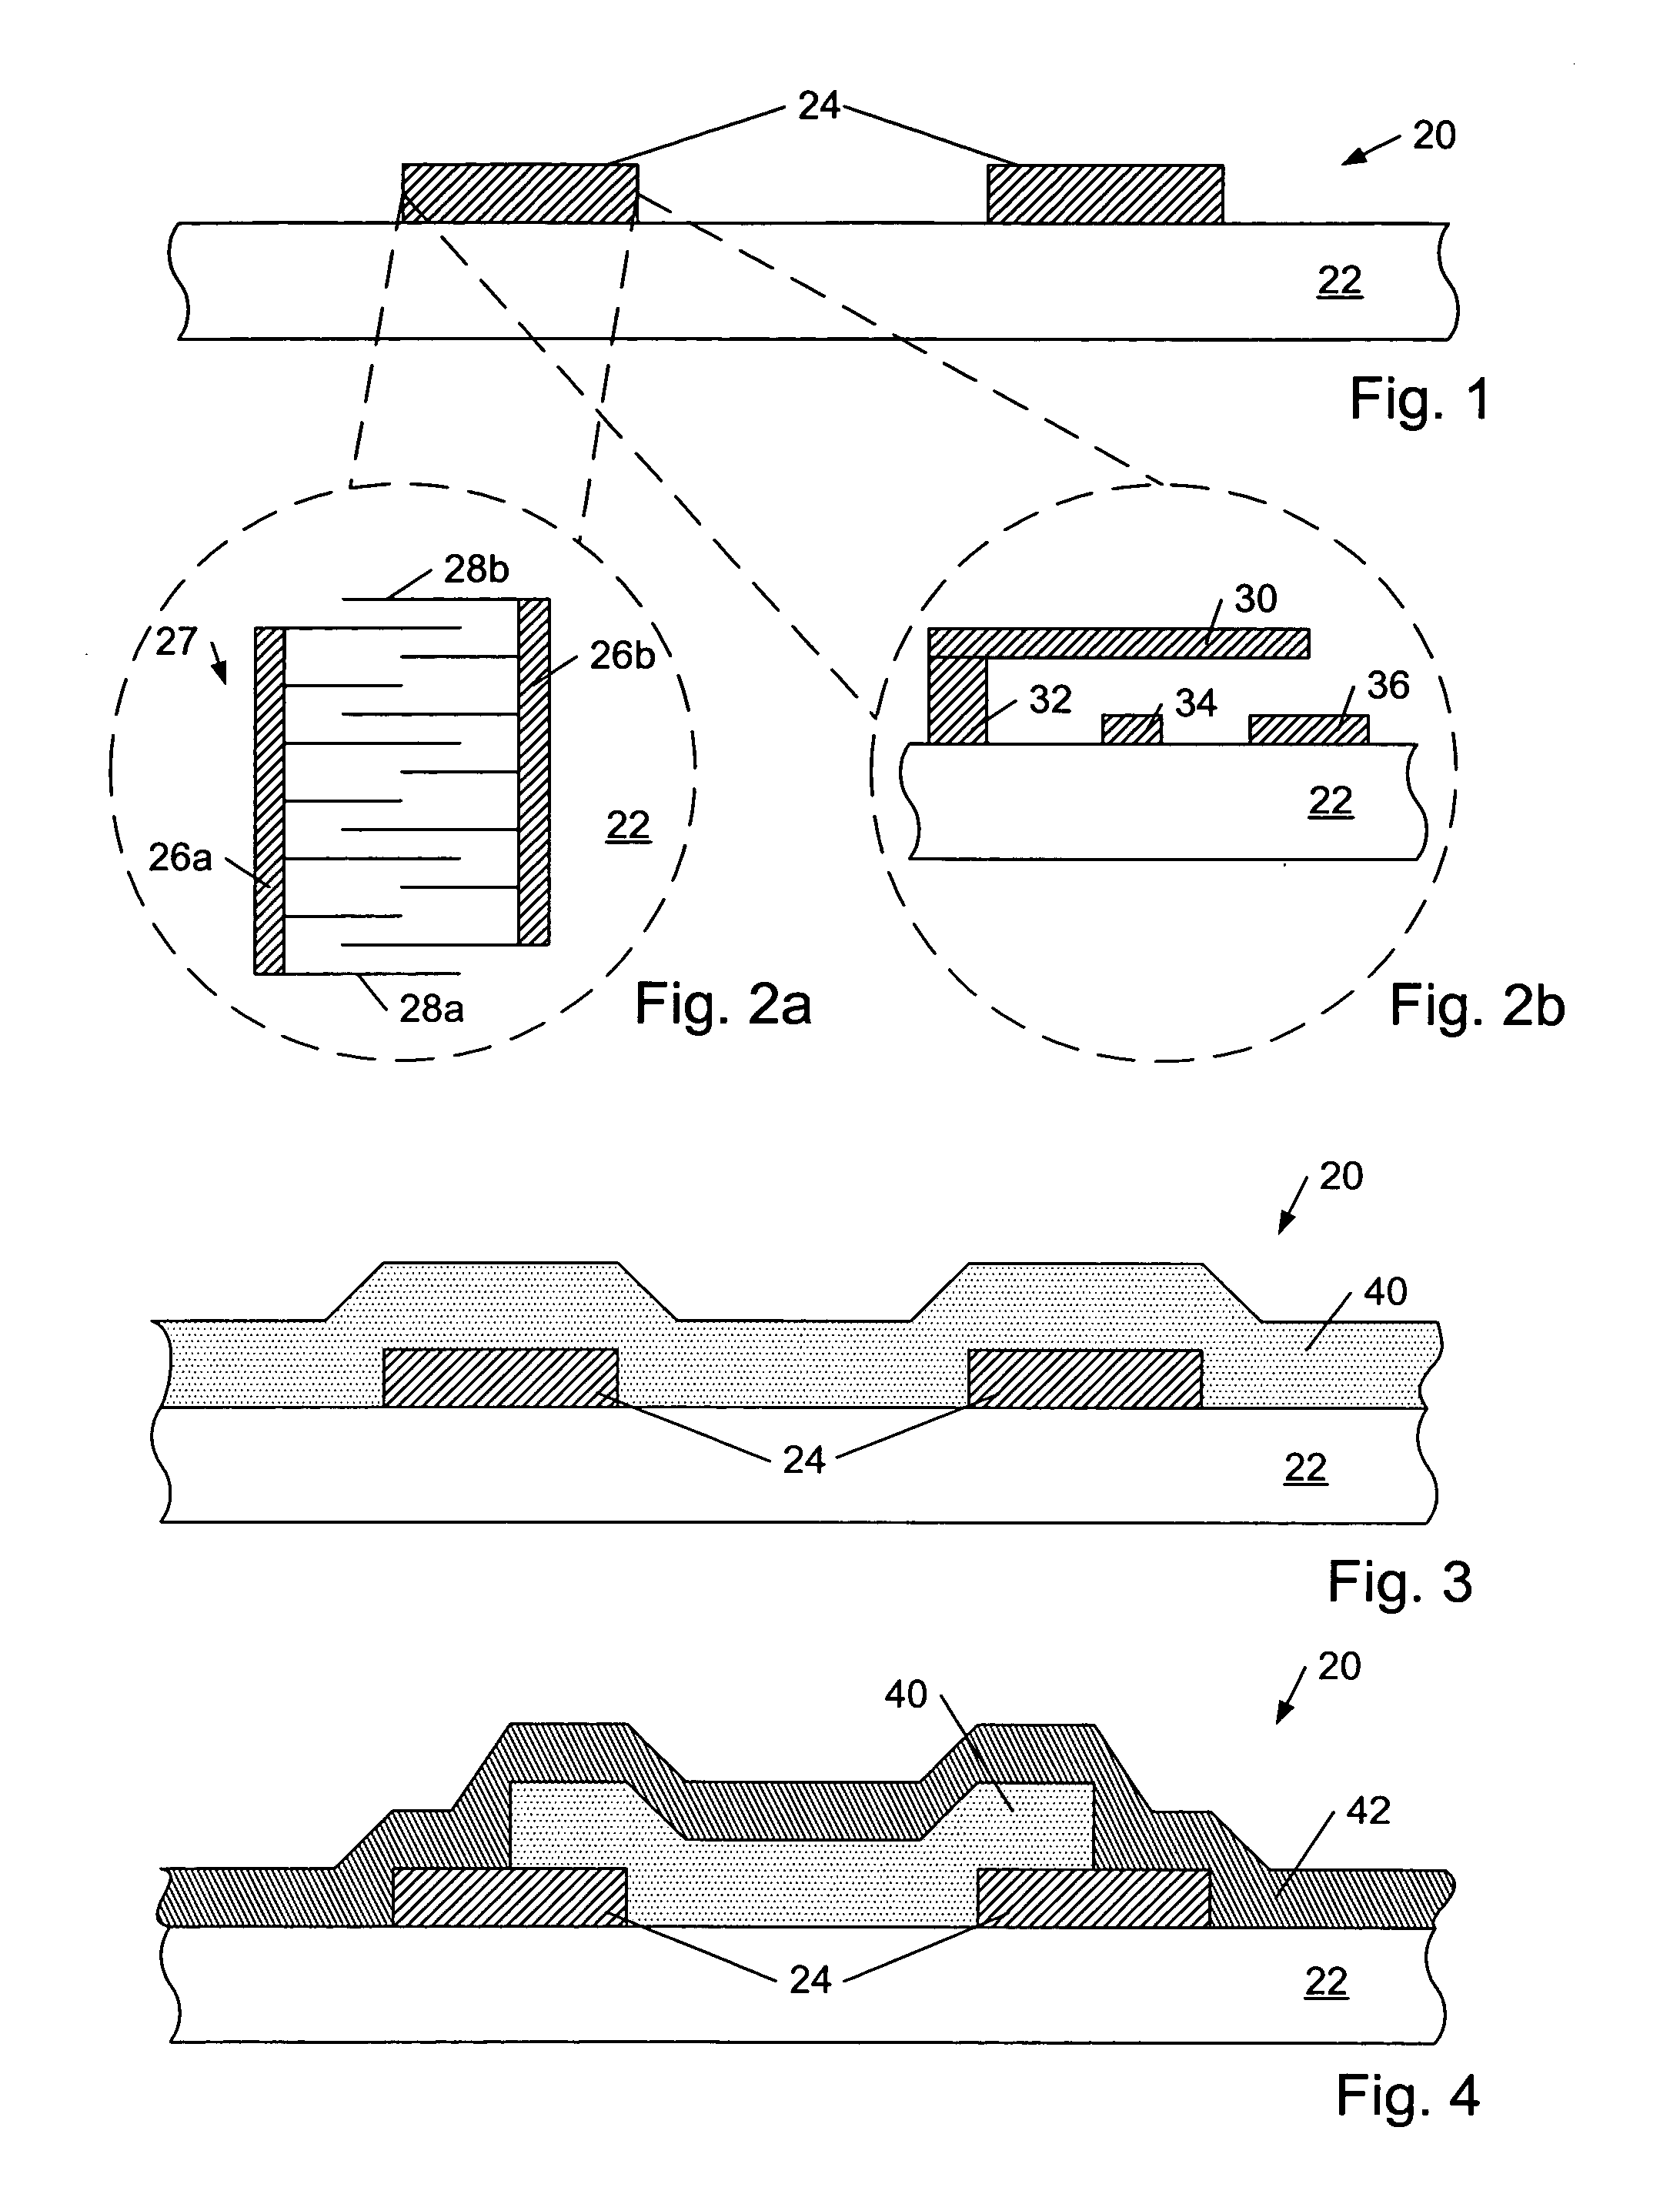 Integrated circuit having one or more conductive devices formed over a SAW and/or MEMS device